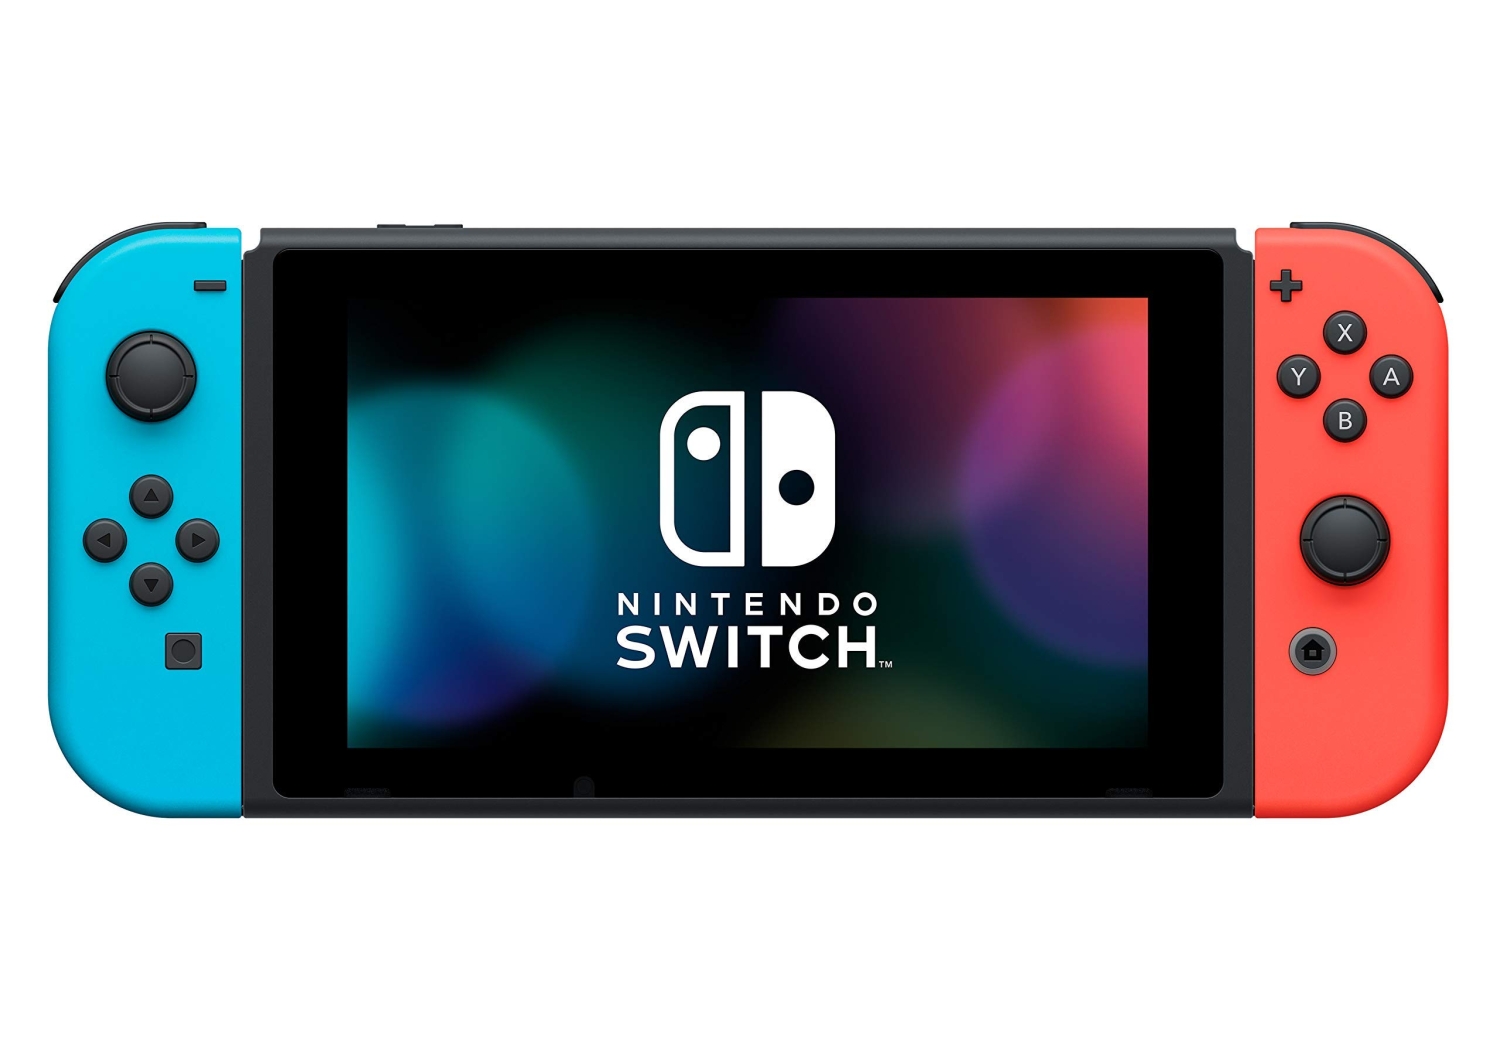 HUGE Leaks for Nintendo Switch 2 Just Appeared! 